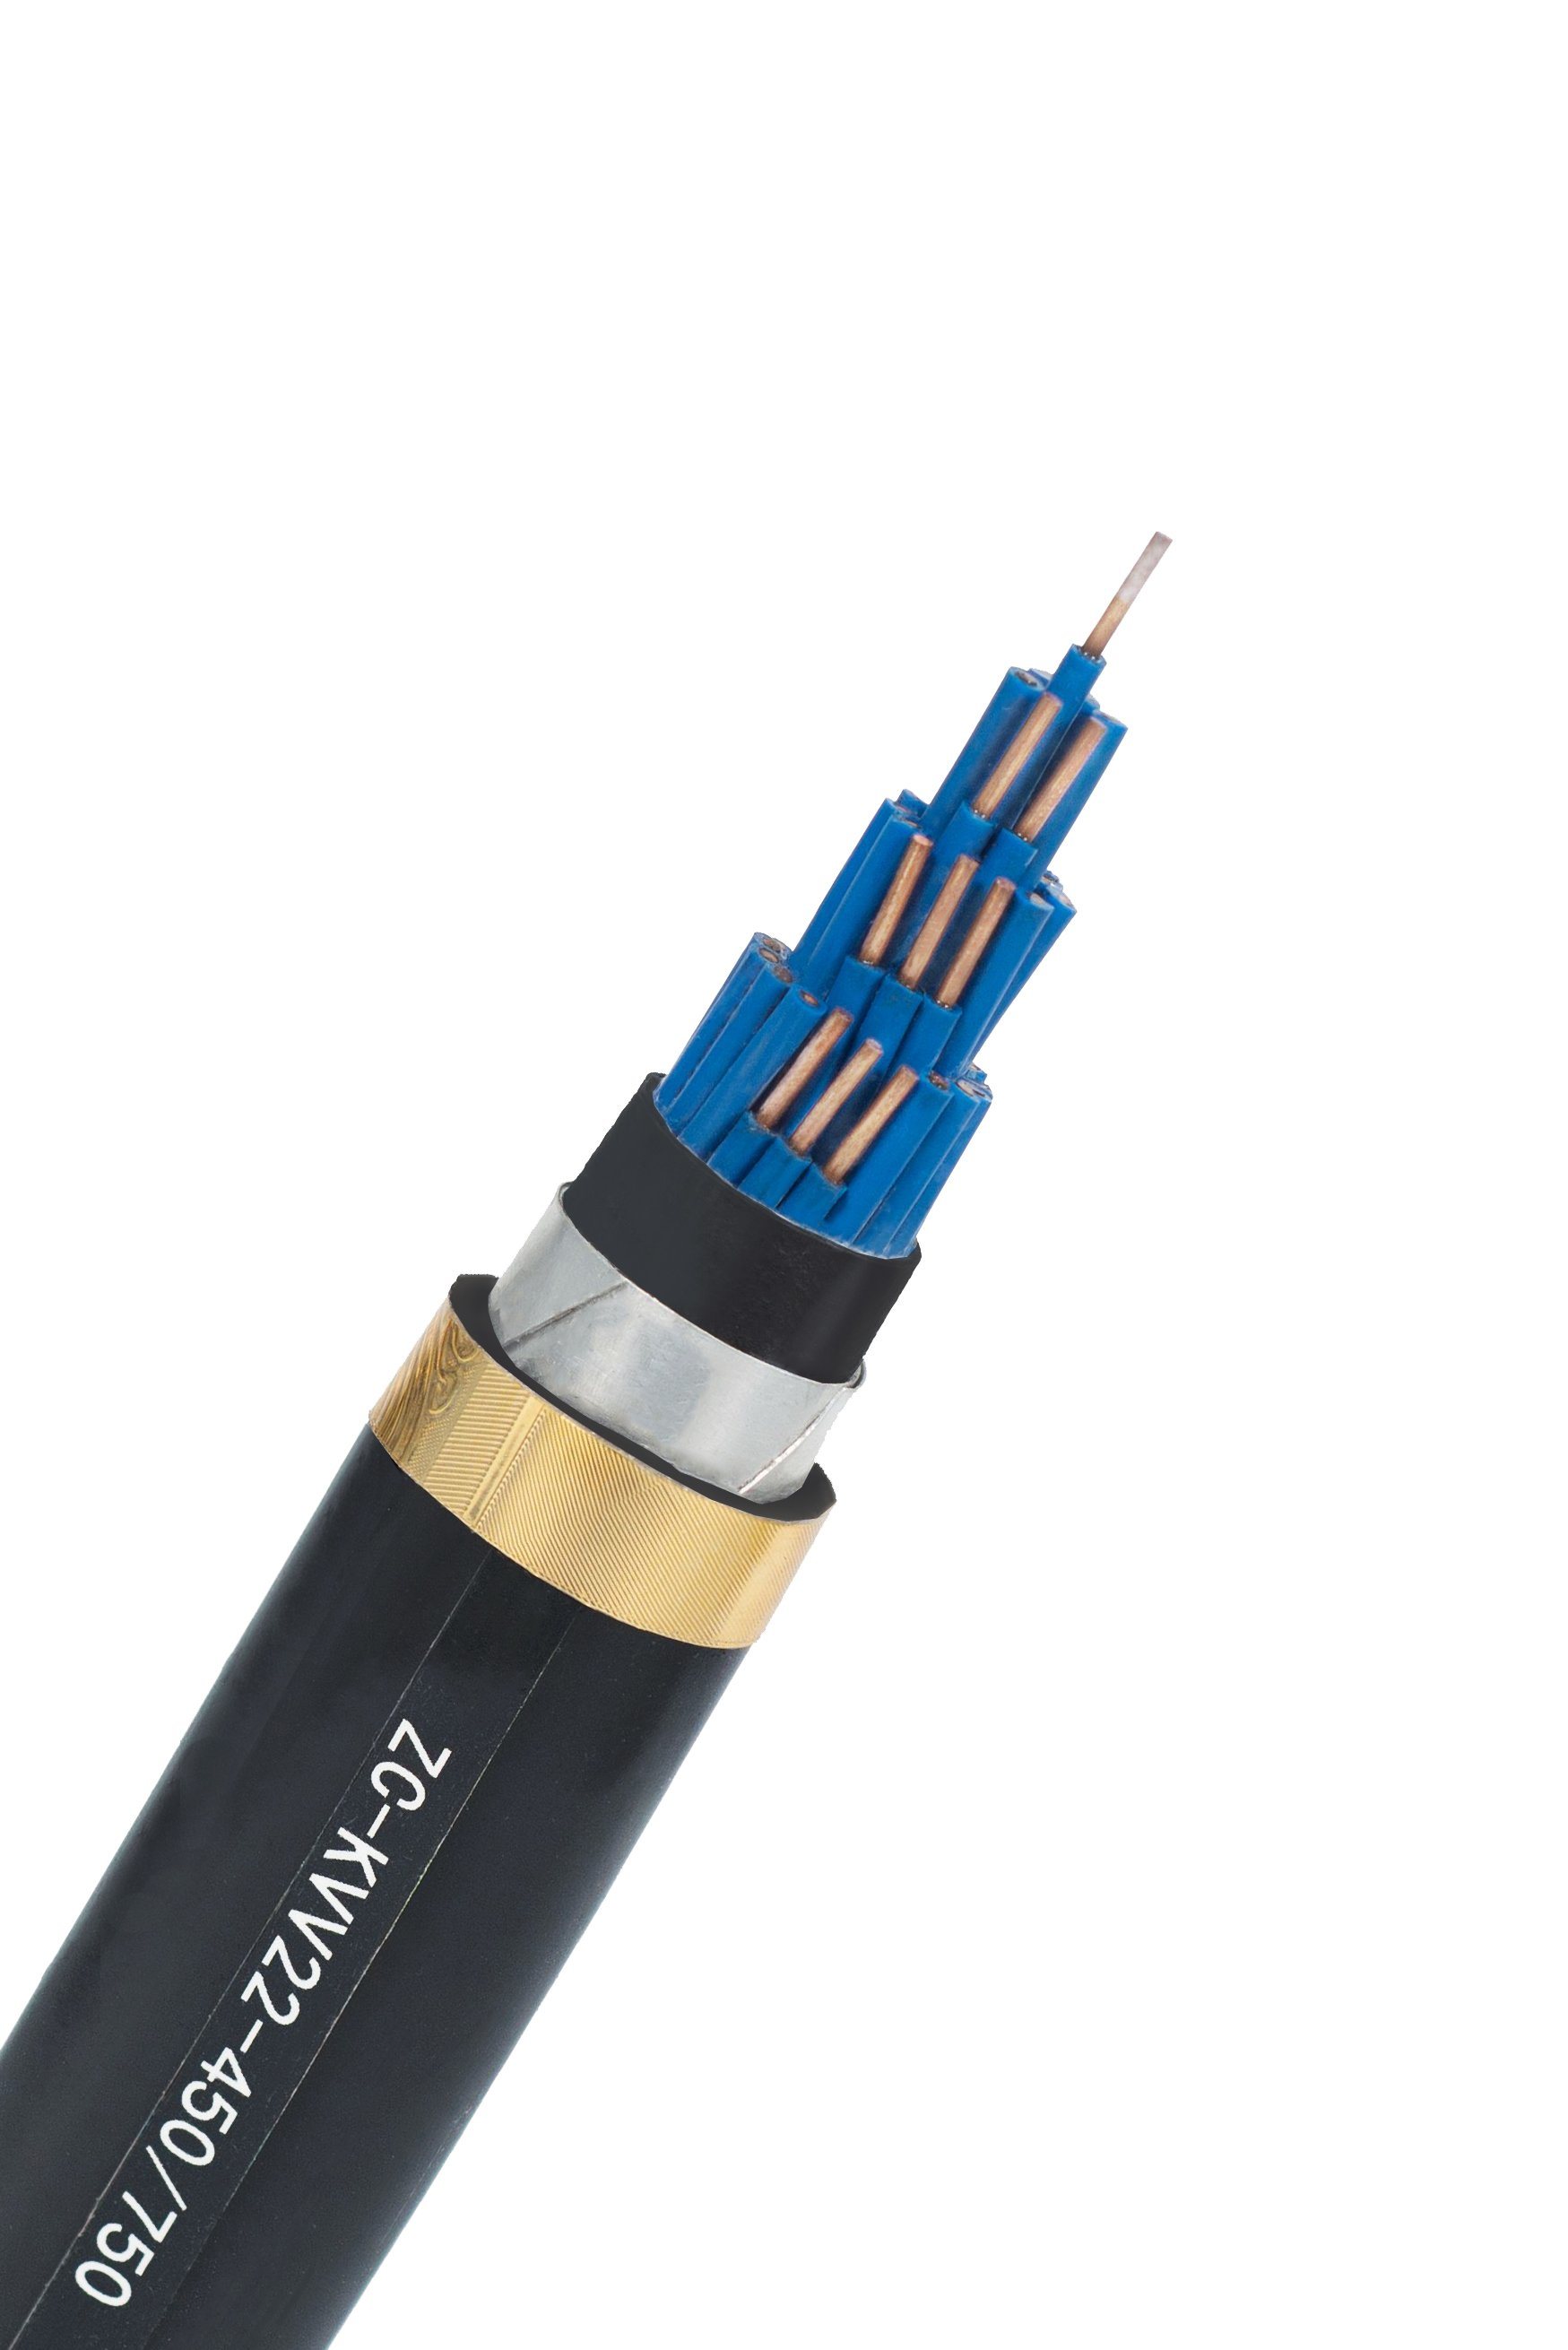 High Performance Super Flexible Industry Shielded Control Cables Tinned Copper Braiding Special PVC Cables